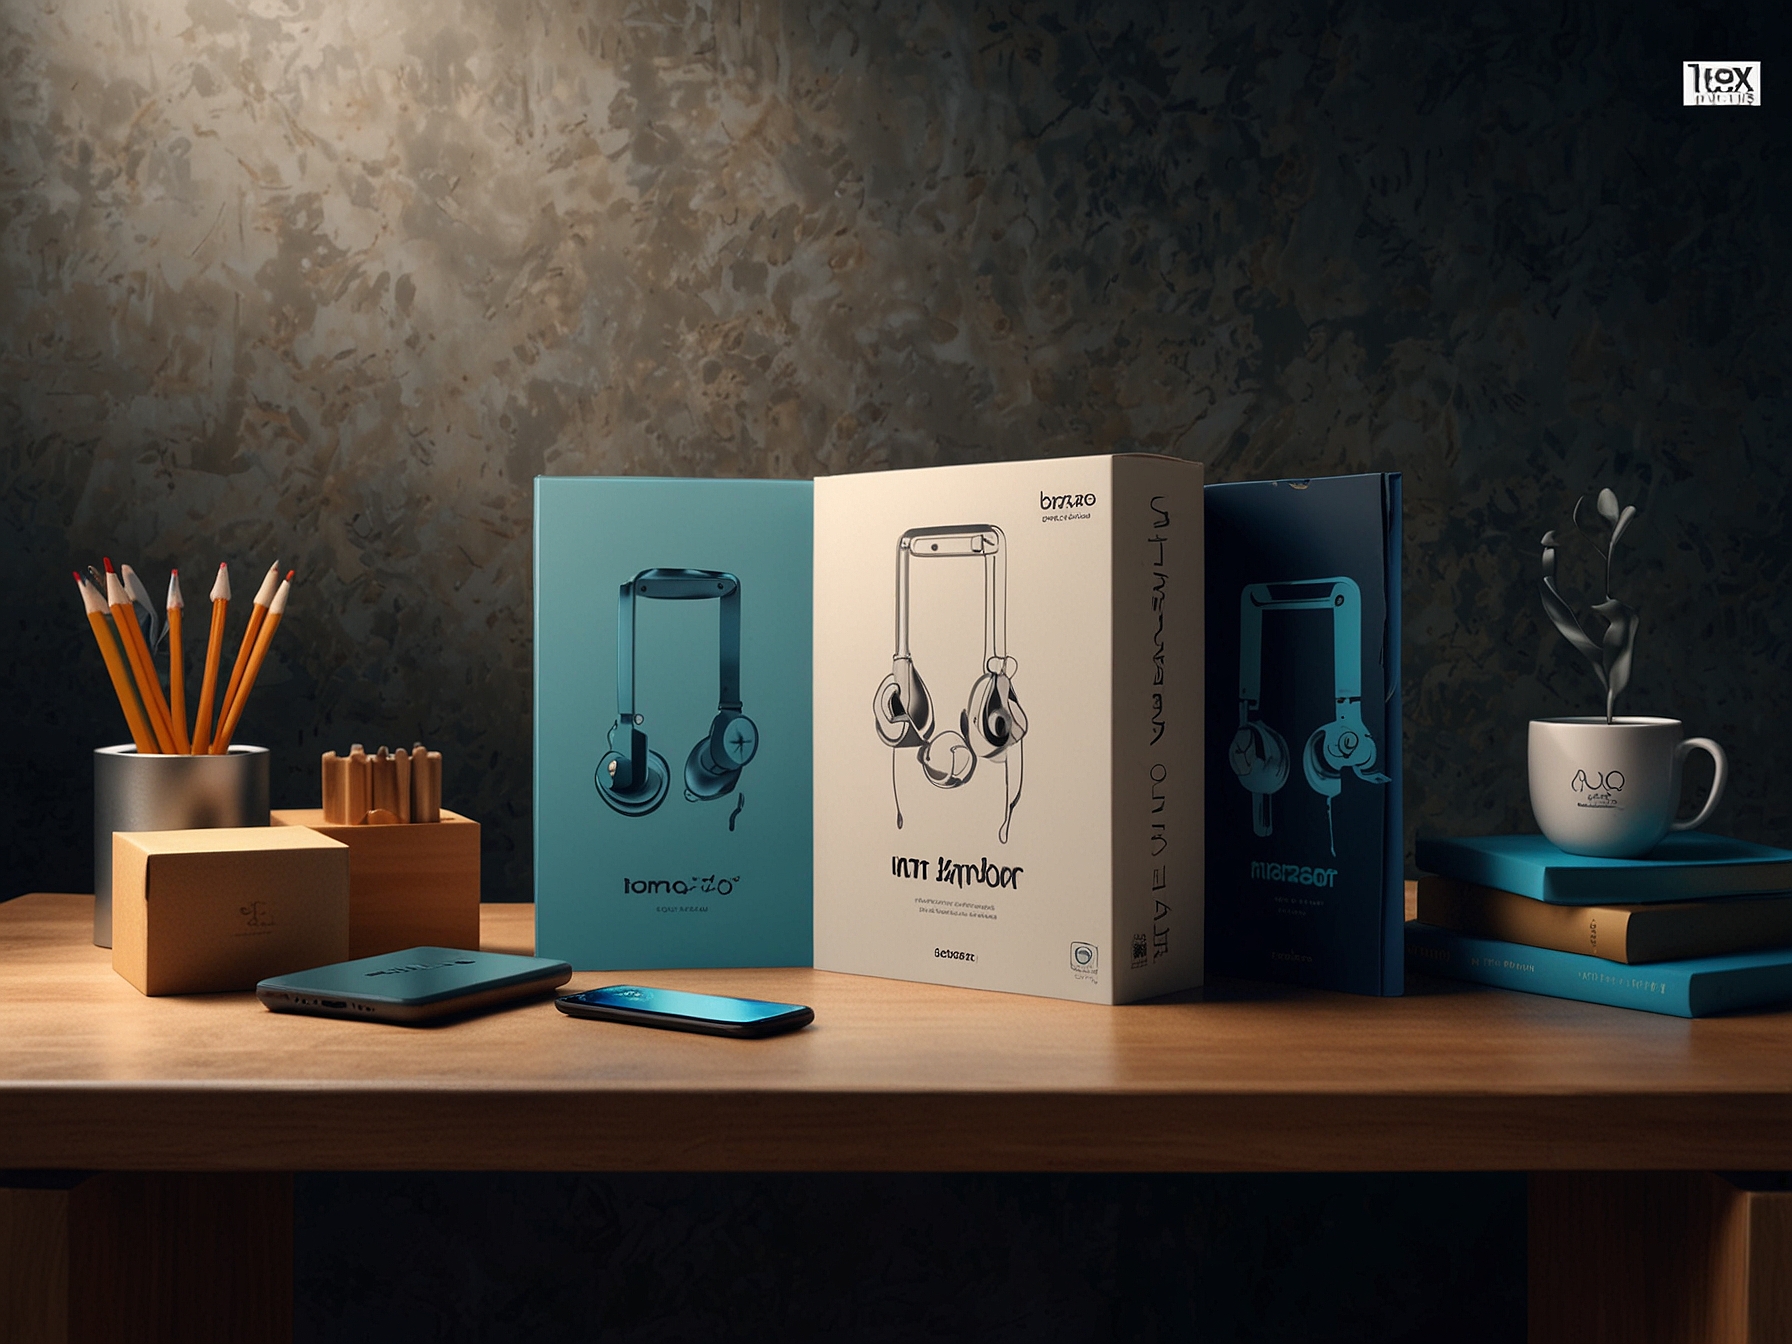 A promotional banner on Amazon.in featuring the Honor 200 series, highlighting the collaboration and excitement building up for the upcoming launch.